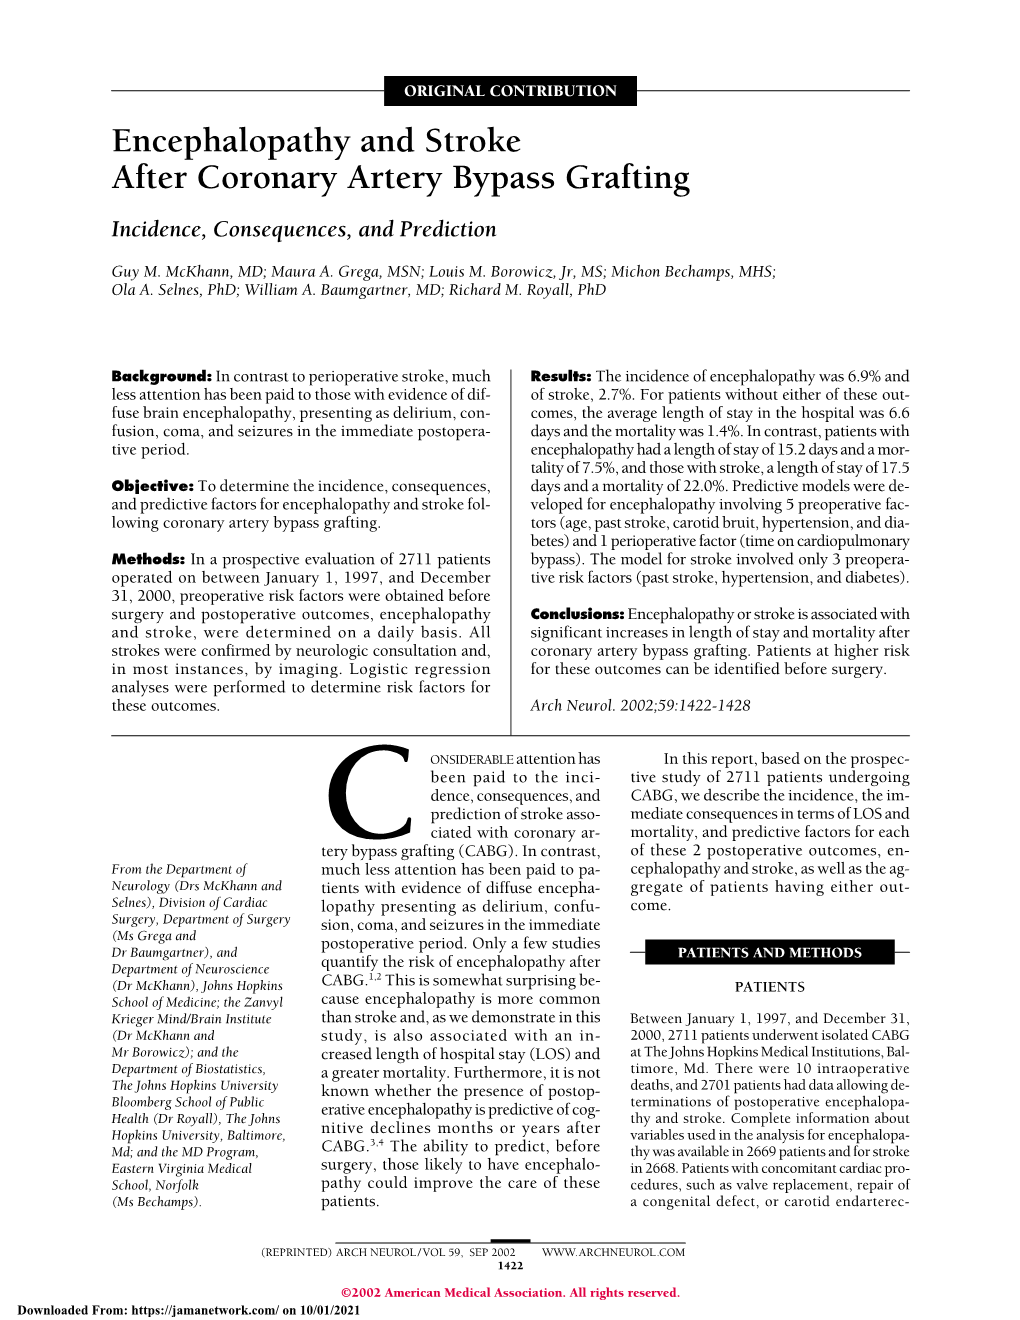 Encephalopathy and Stroke After Coronary Artery Bypass Grafting Incidence, Consequences, and Prediction